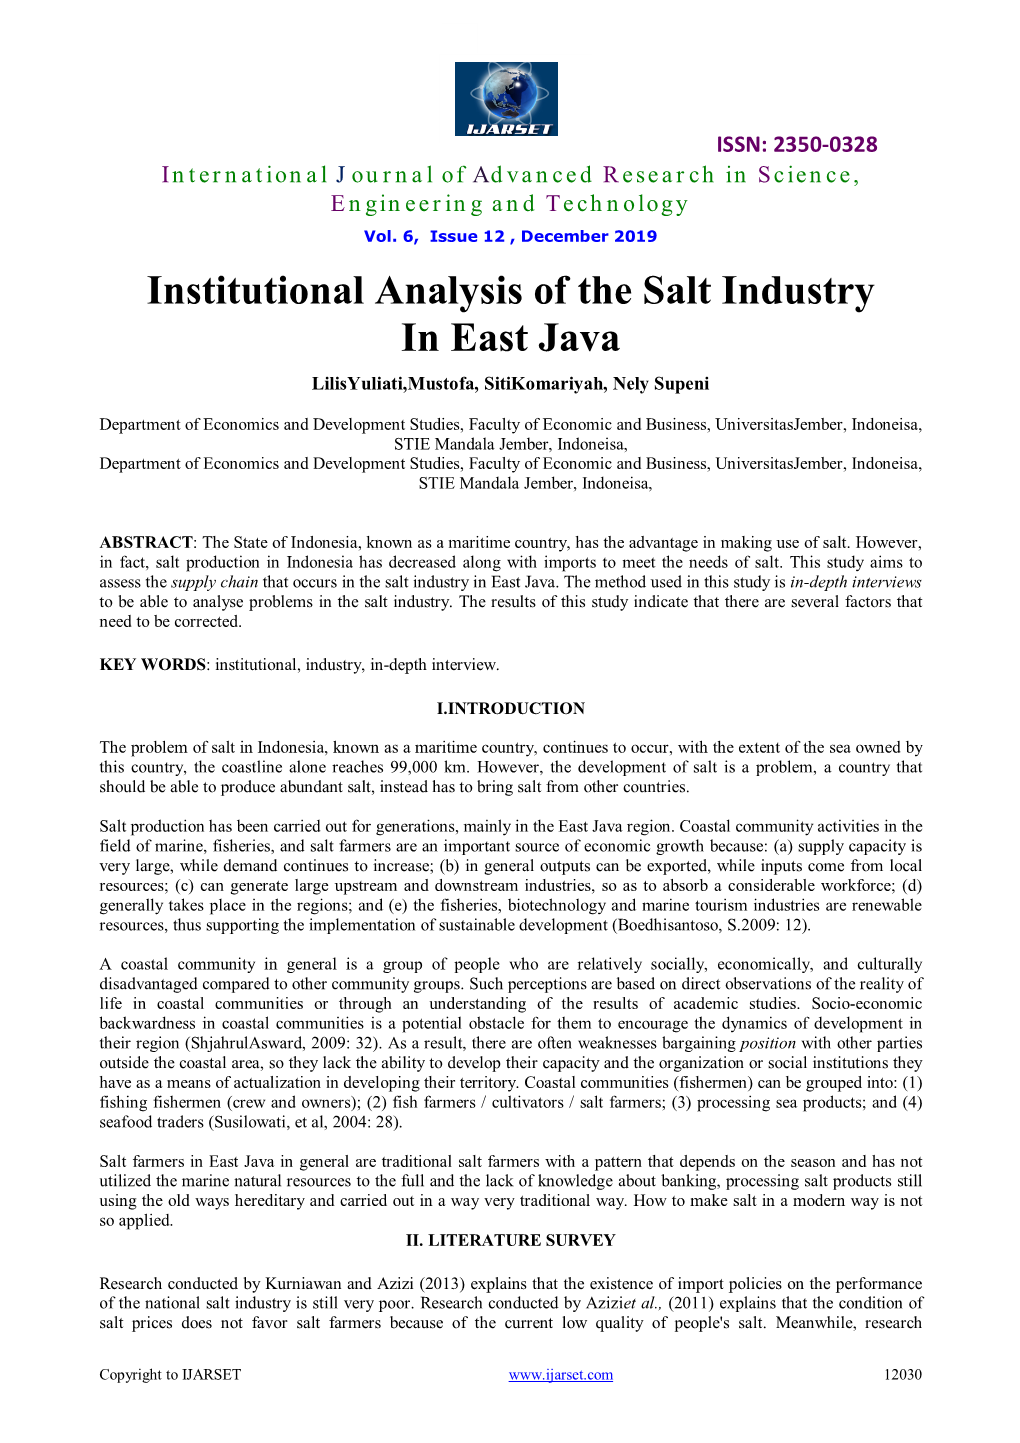 Institutional Analysis of the Salt Industry in East Java